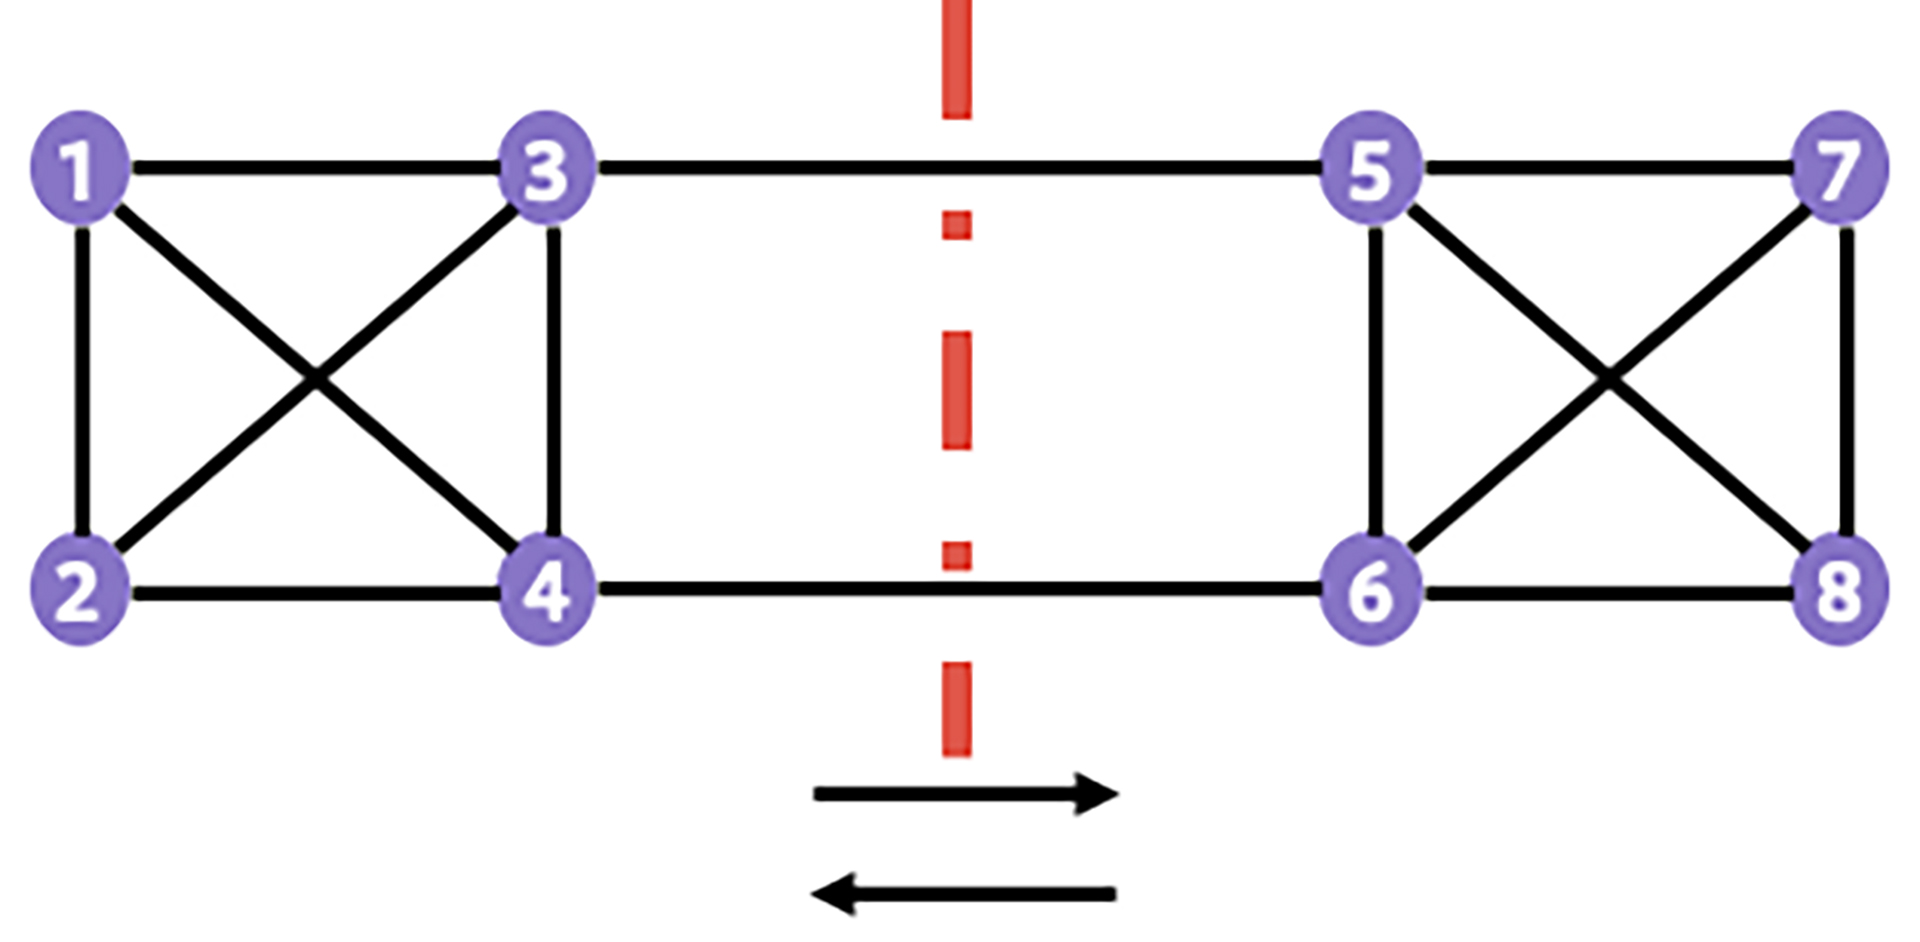 This network cut partitions the topology into two sets of nodes, (1,2,3,4) and (5,6,7,8)